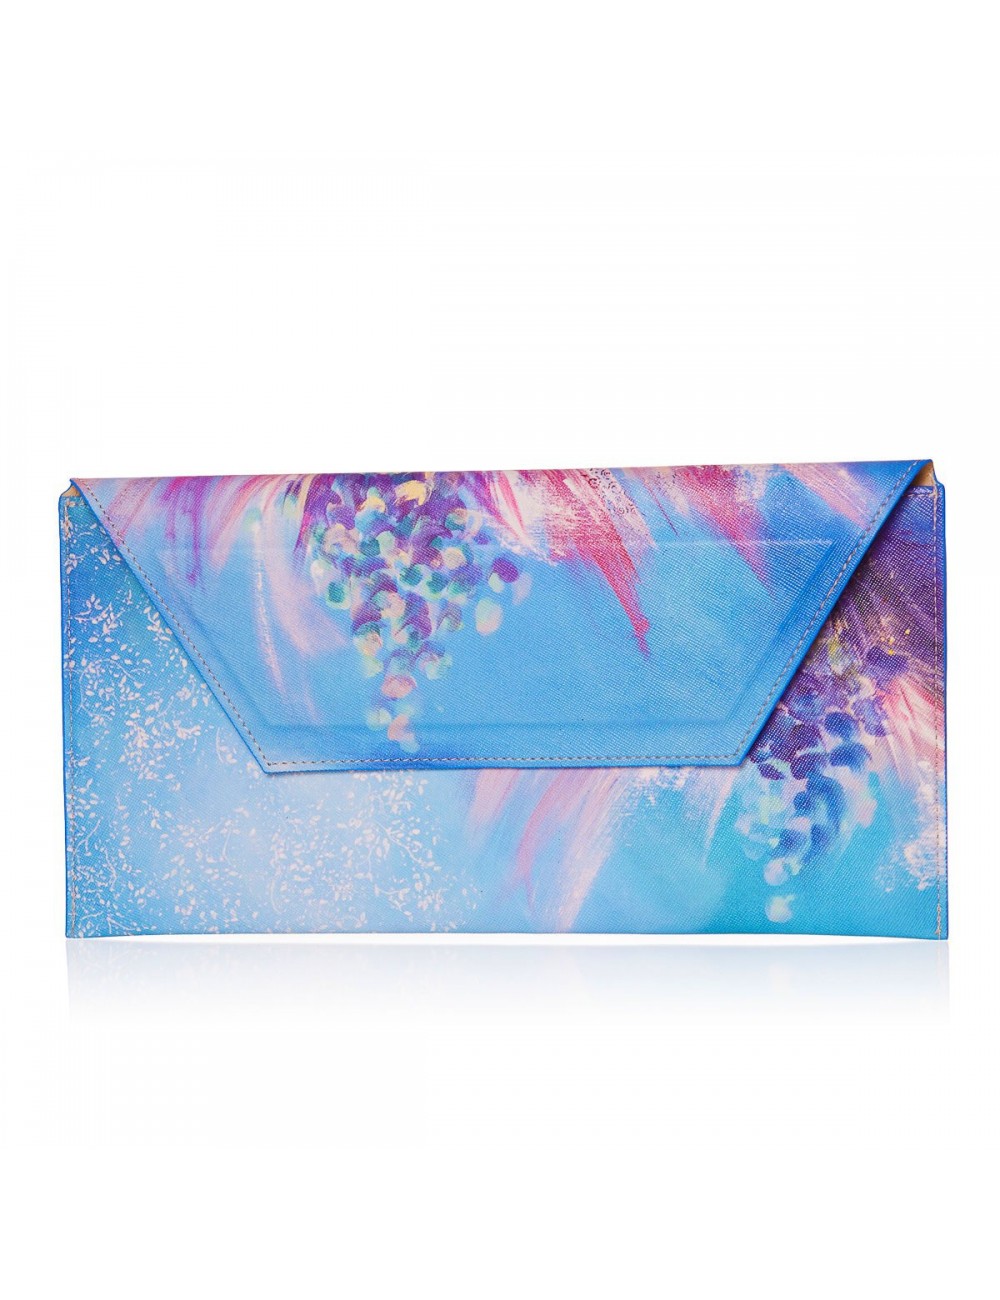 Flowers Whispers Clutch Bag